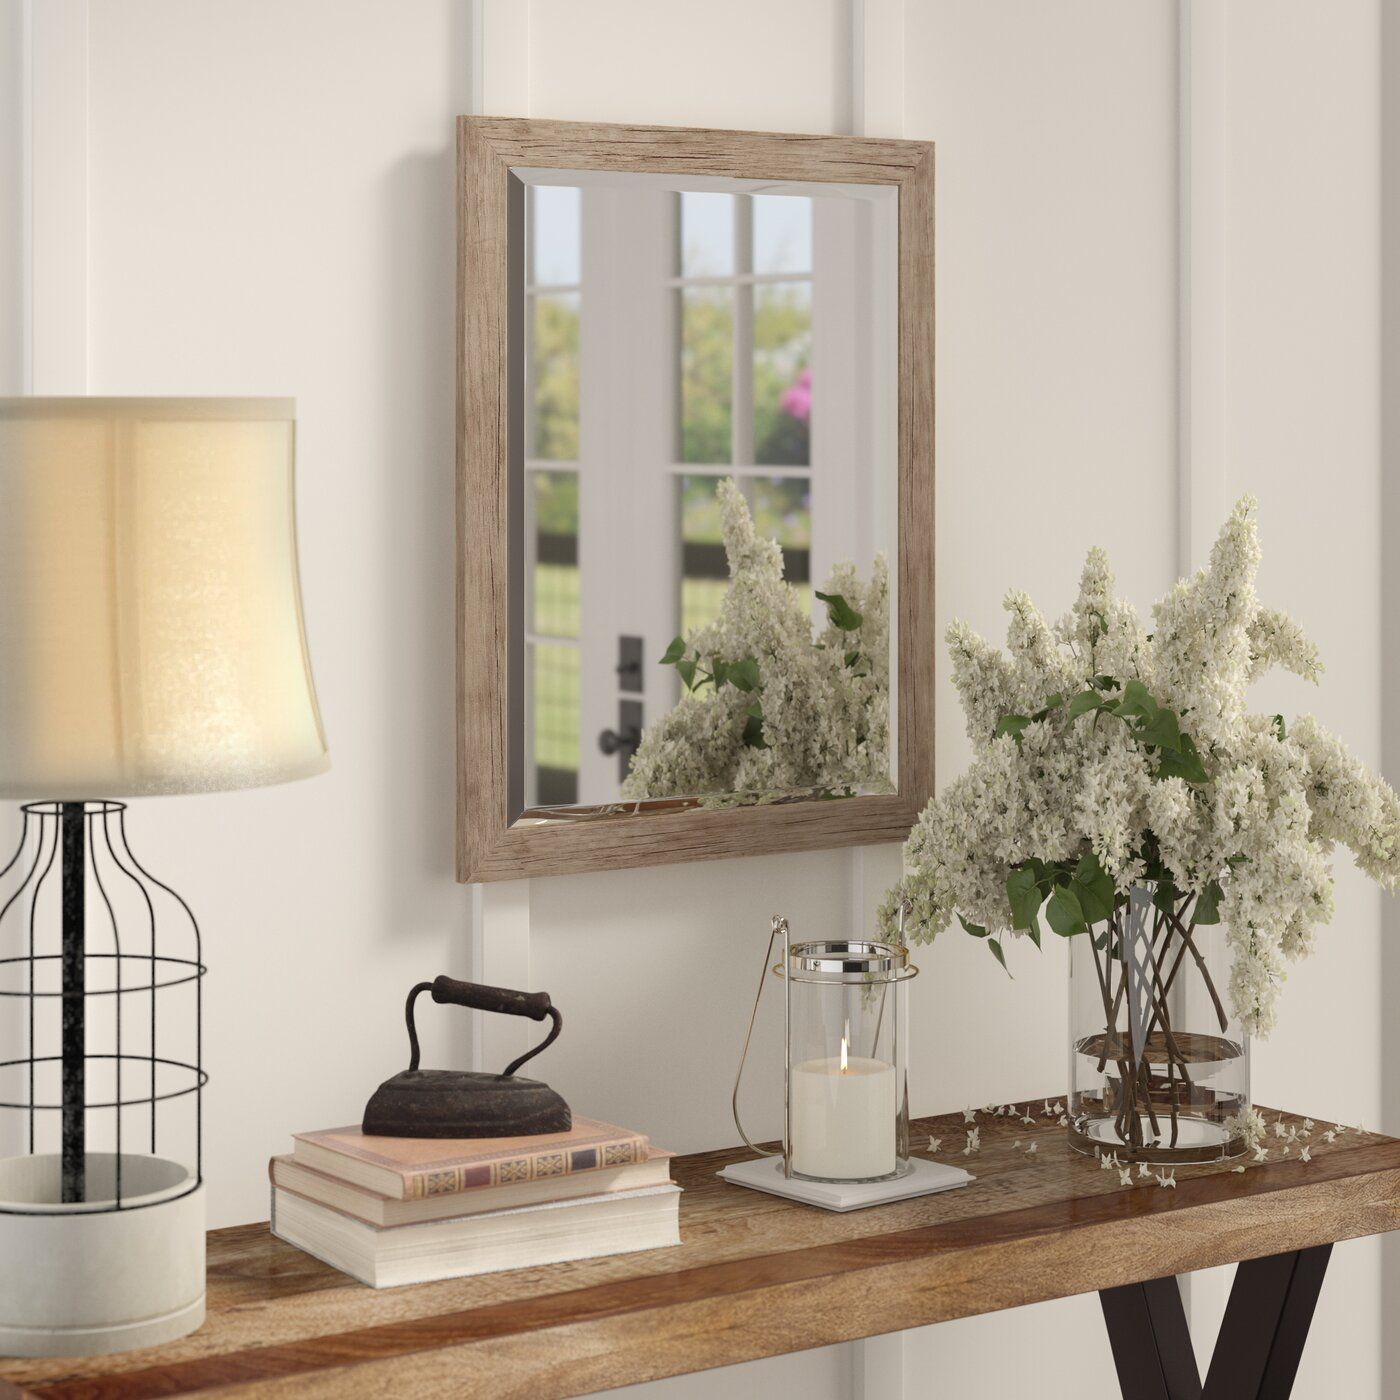 Brucie Framed Decorative Accent Mirror In 2020 | Cottage Bathroom With Regard To Yatendra Cottage/country Beveled Accent Mirrors (View 9 of 15)